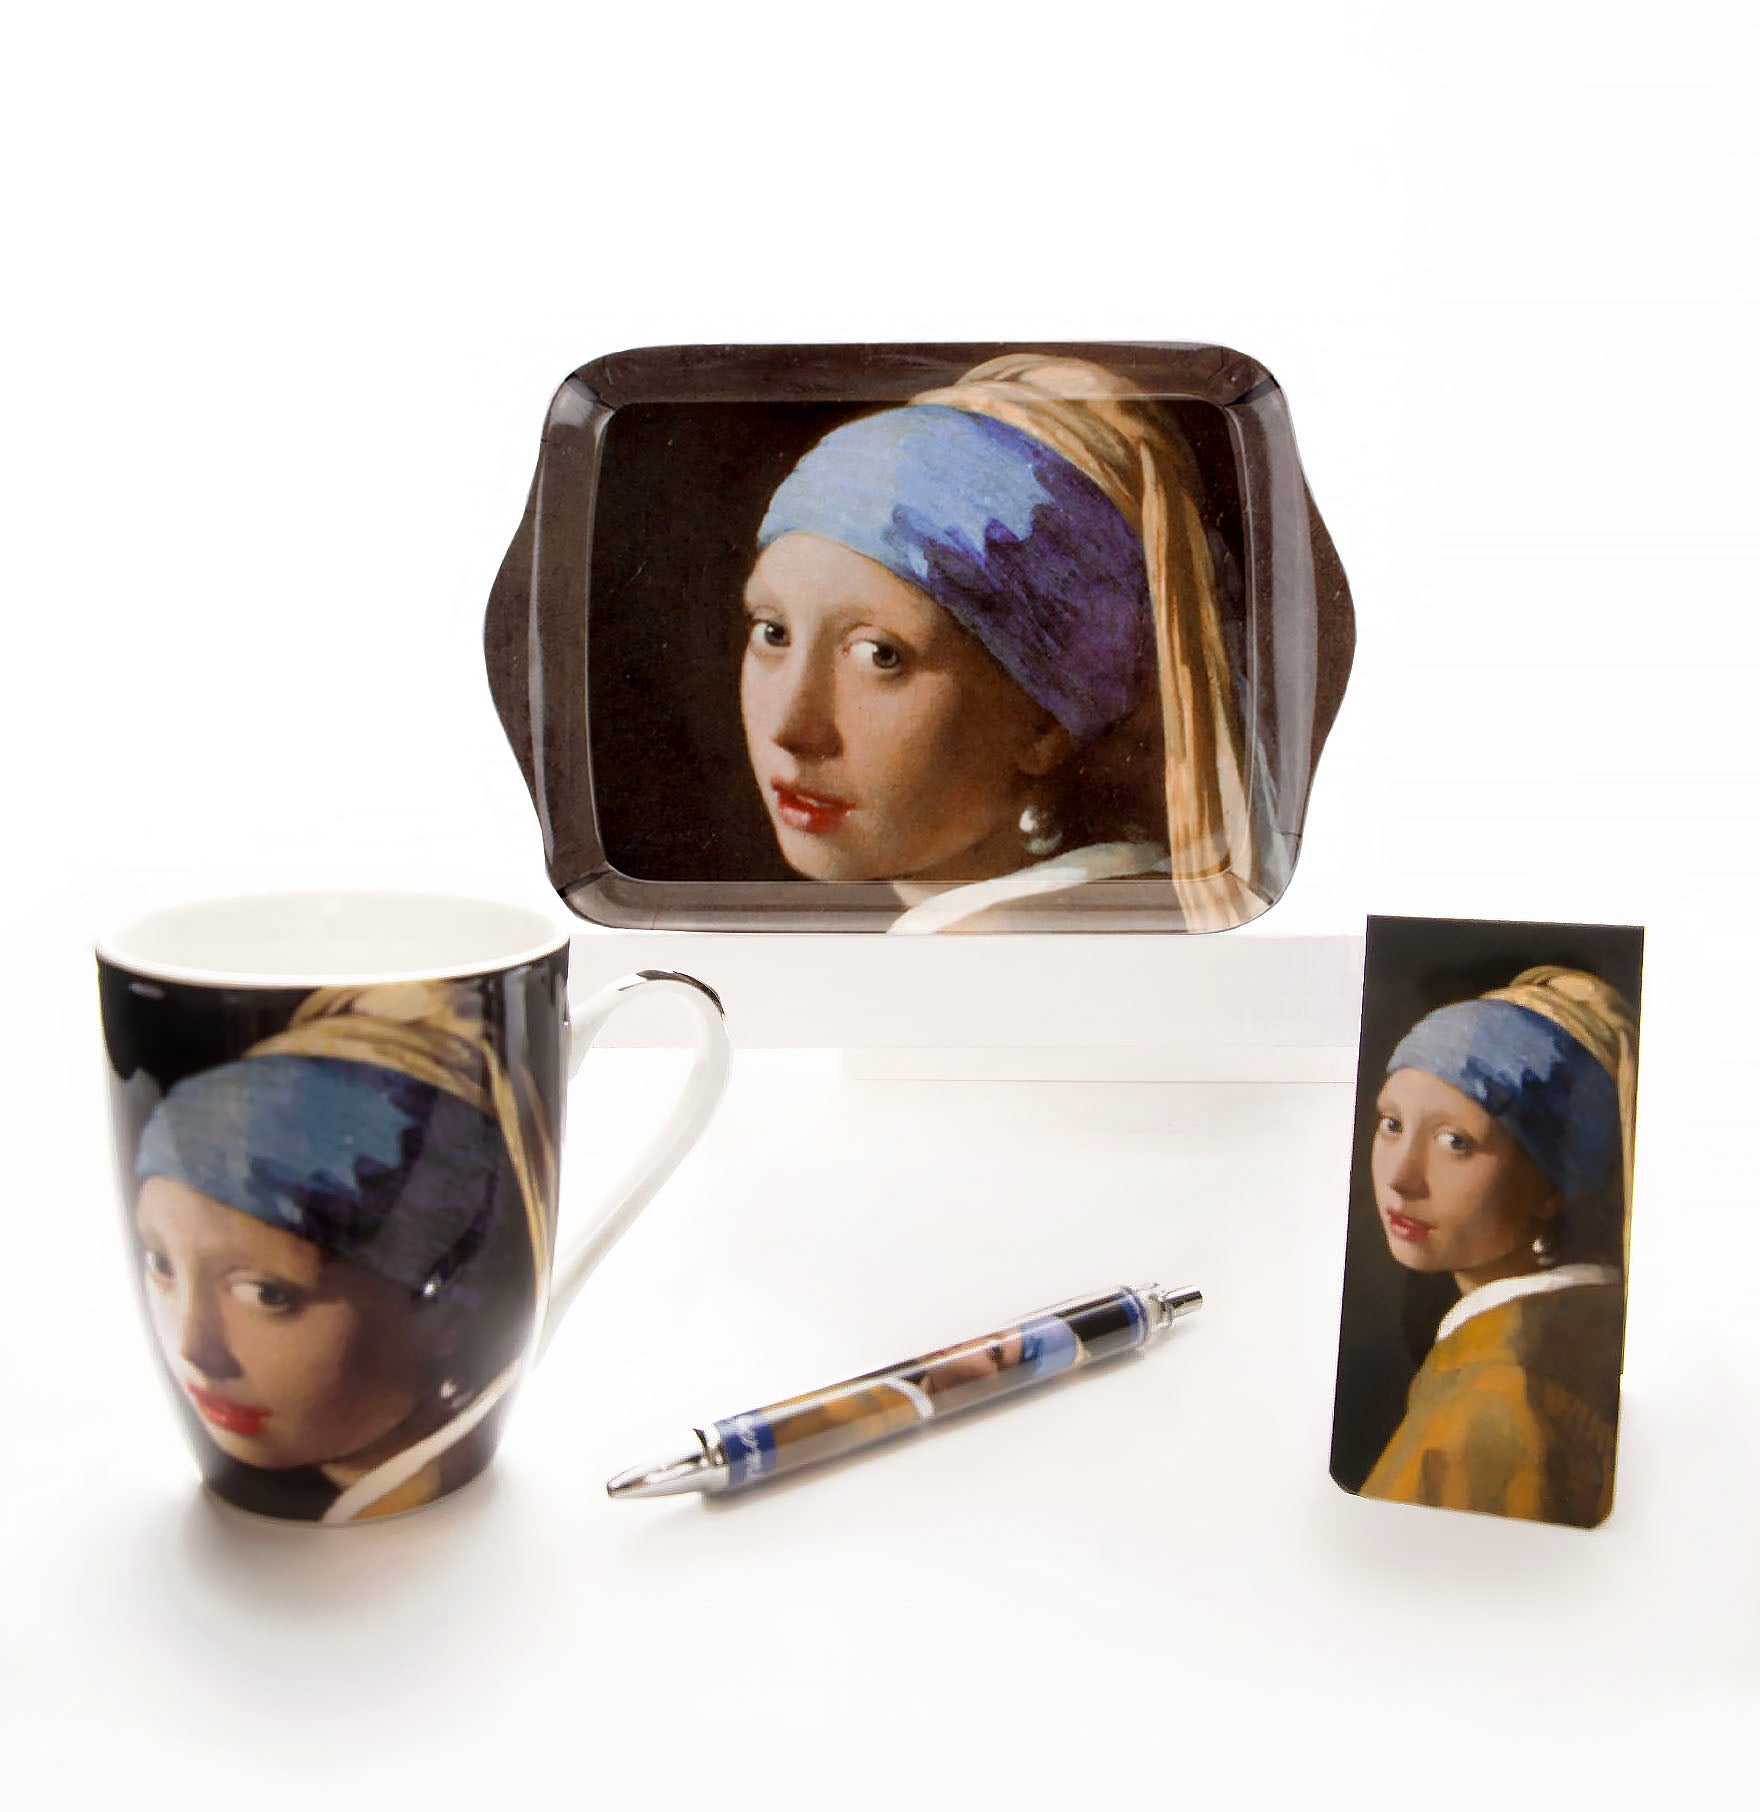 Shop Now! Holland's Mauritshuis Souvenir Gift Sets! 'Girl wit a Pearl Earring' Coffee & Tea Gift Set, Vermeer